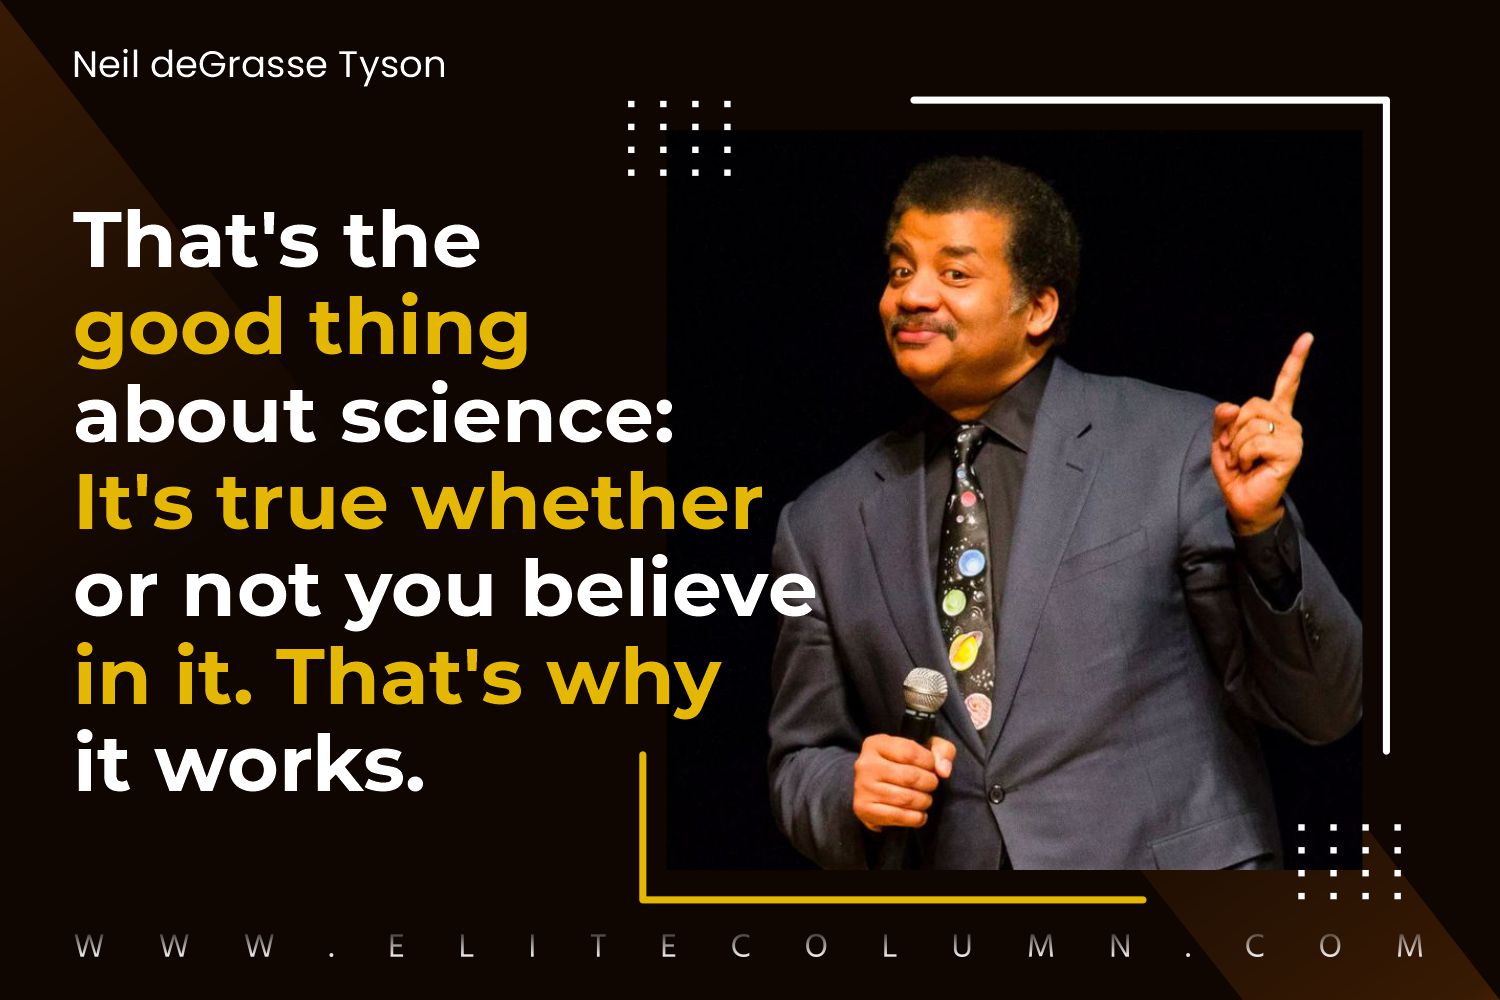 Neil degrasse tyson funny quotes